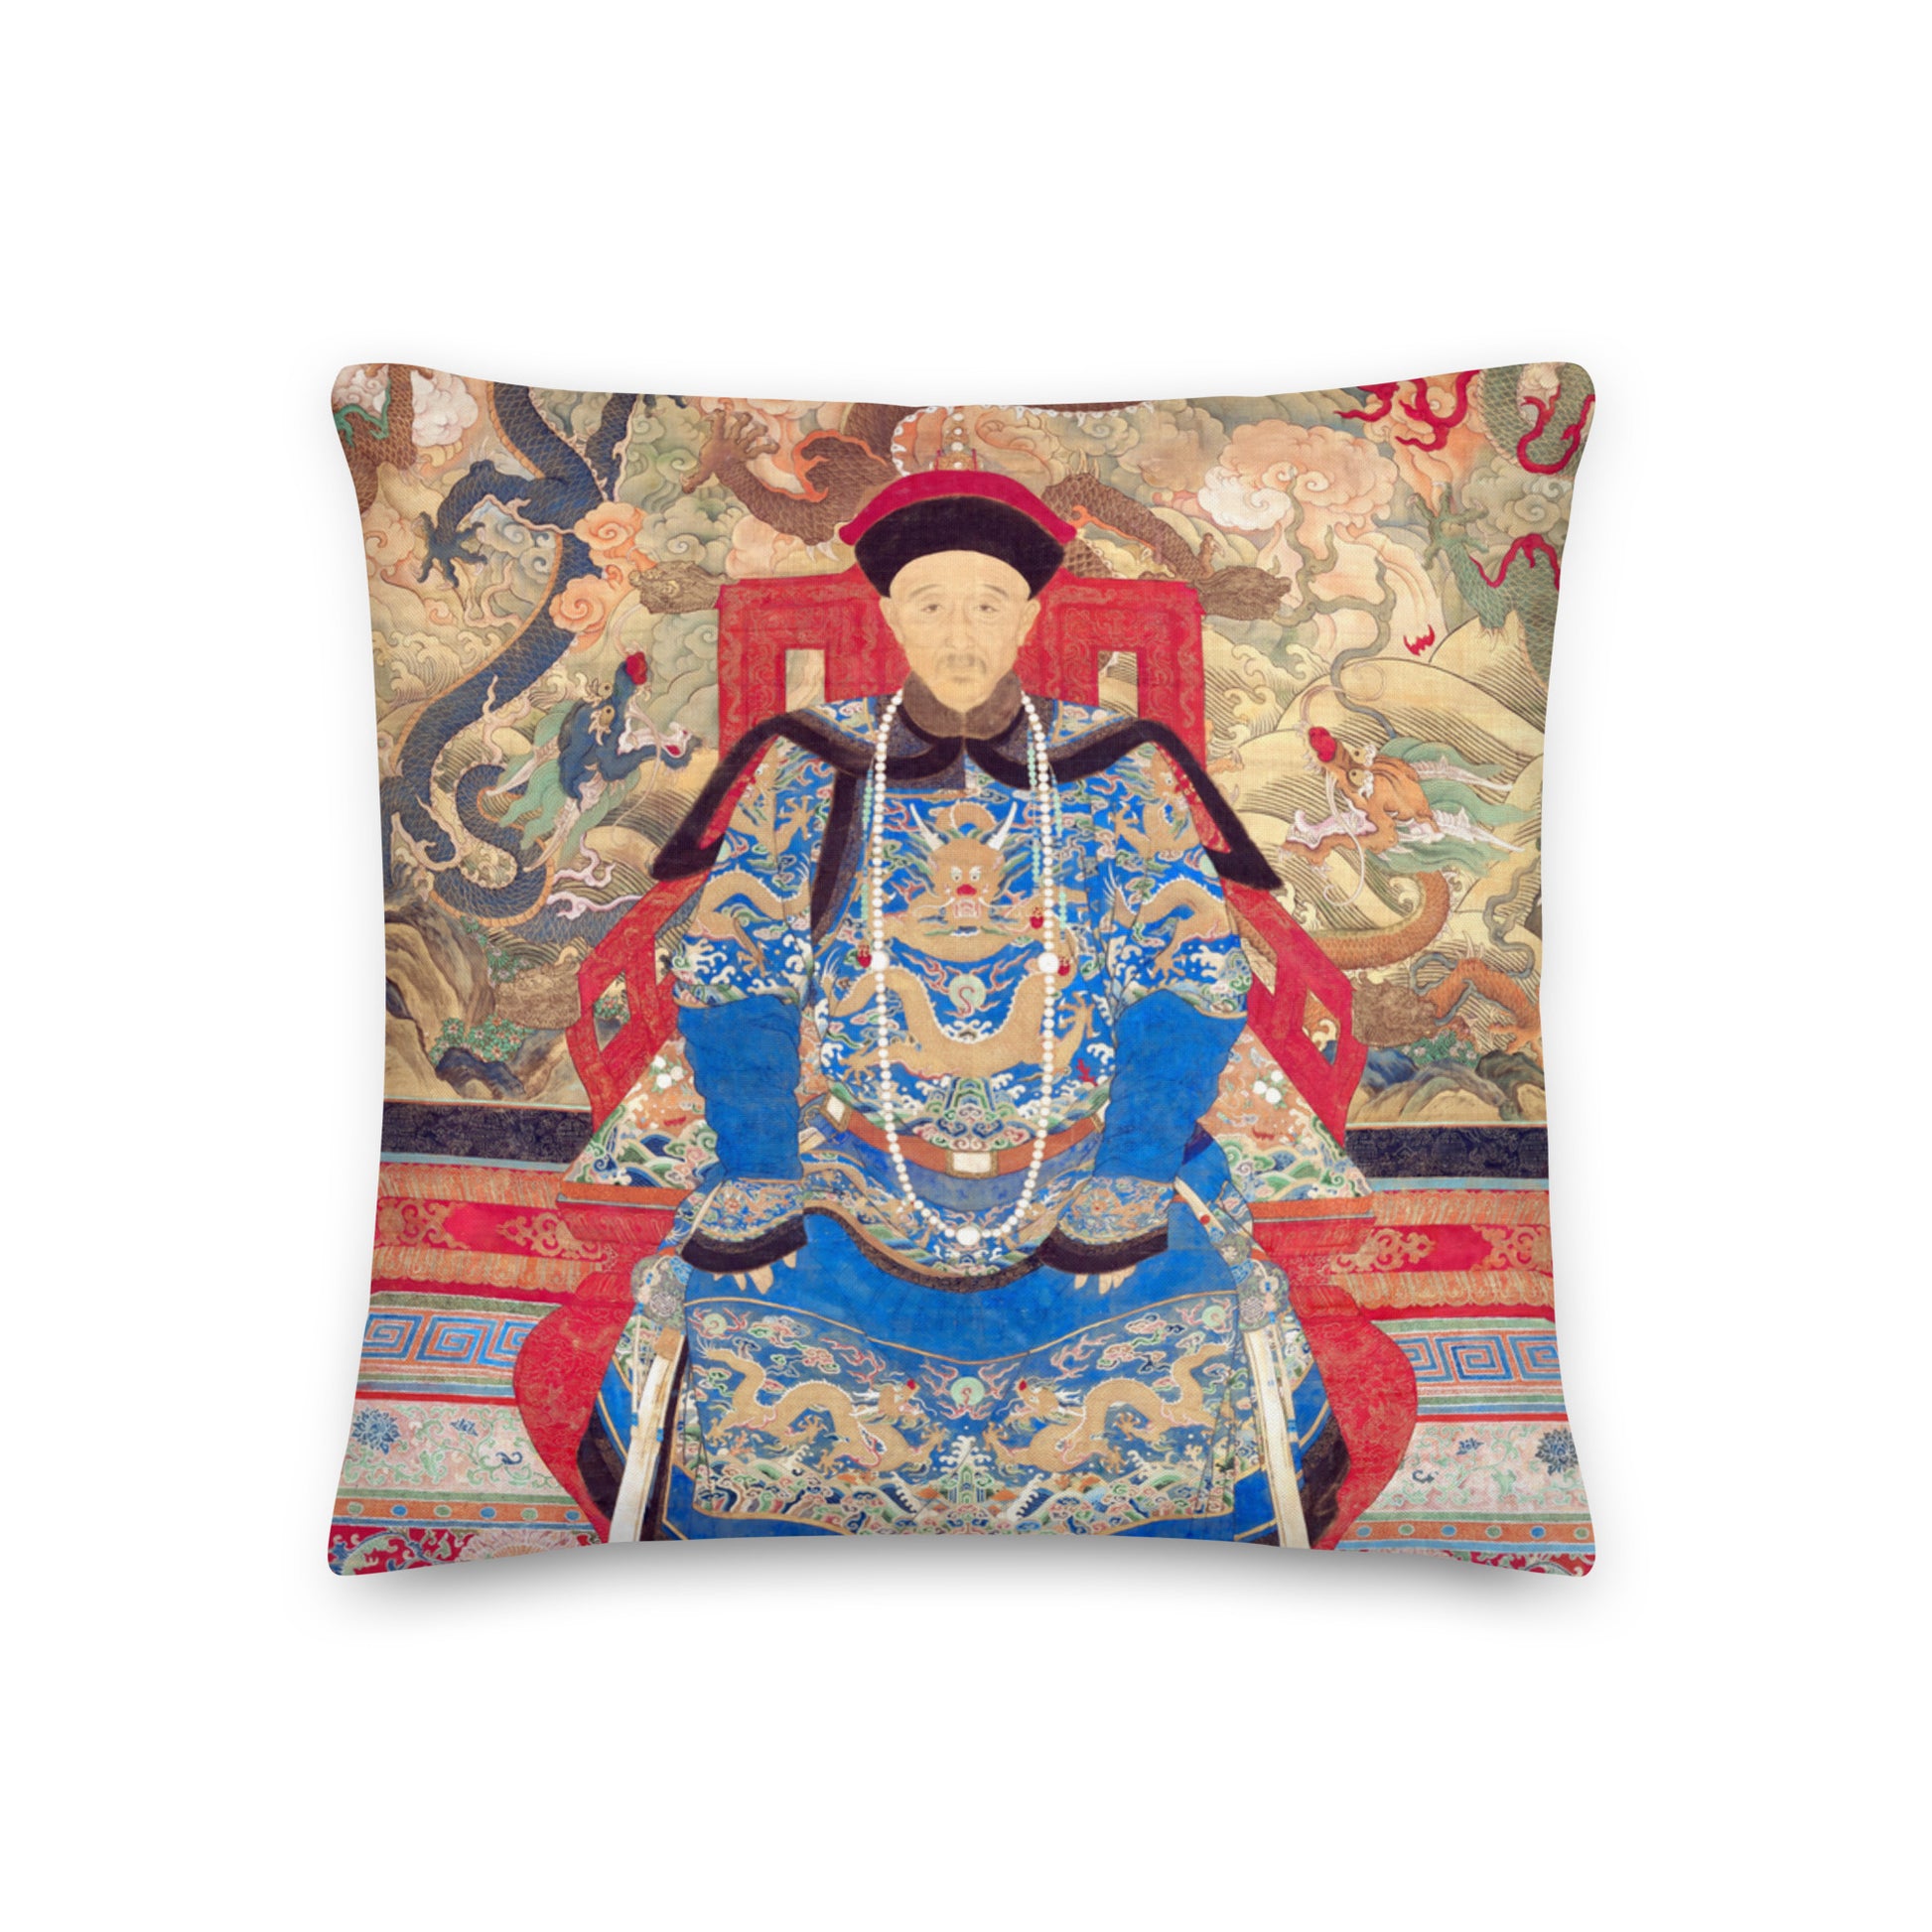 Chinese prince from the 18th century decorates this beautiful cushions cover